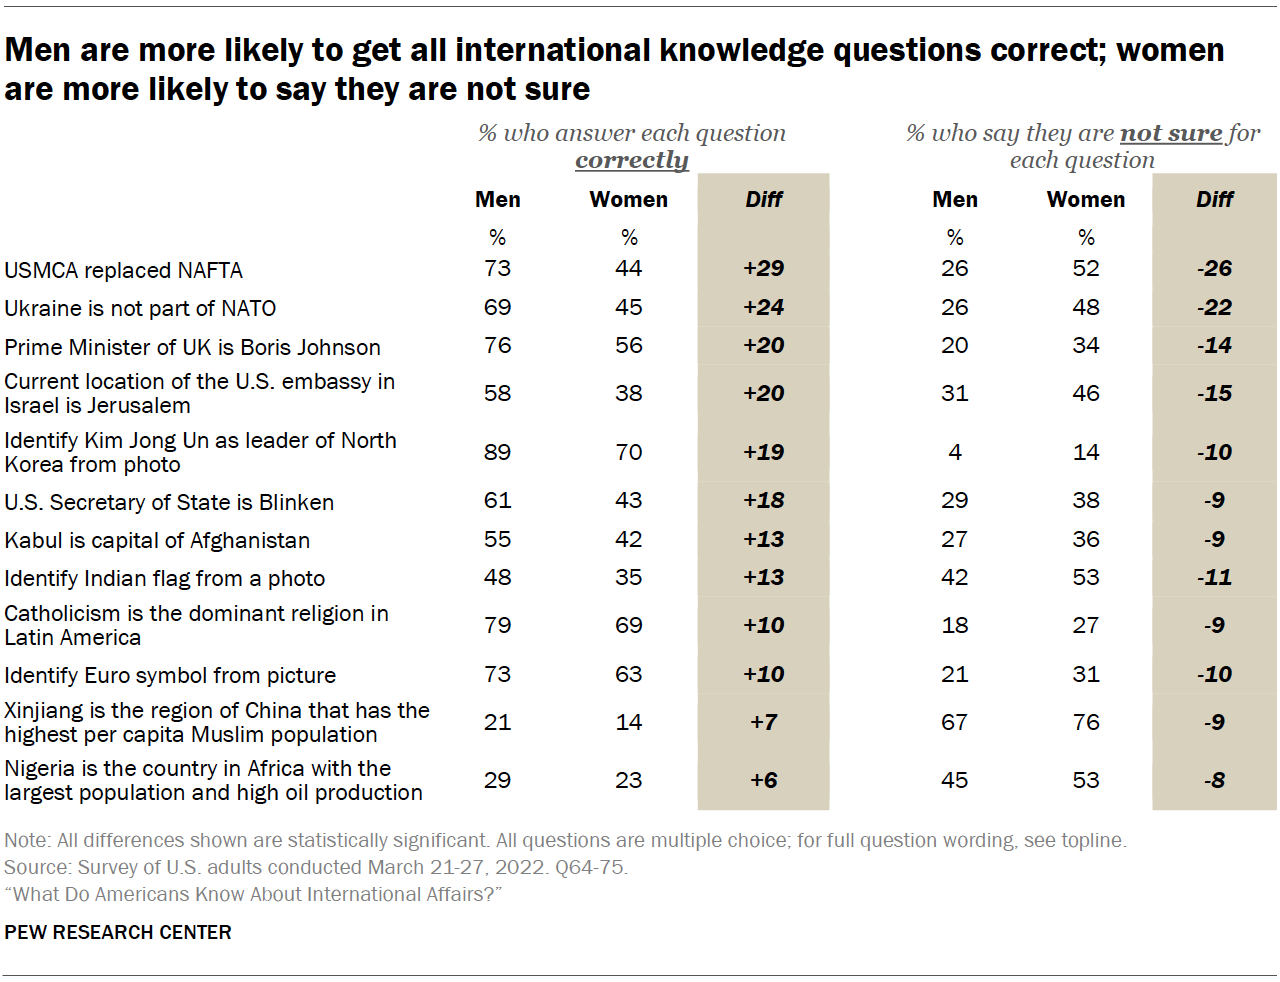 Chart shows men are more likely to get all international knowledge questions correct; women are more likely to say they are not sure